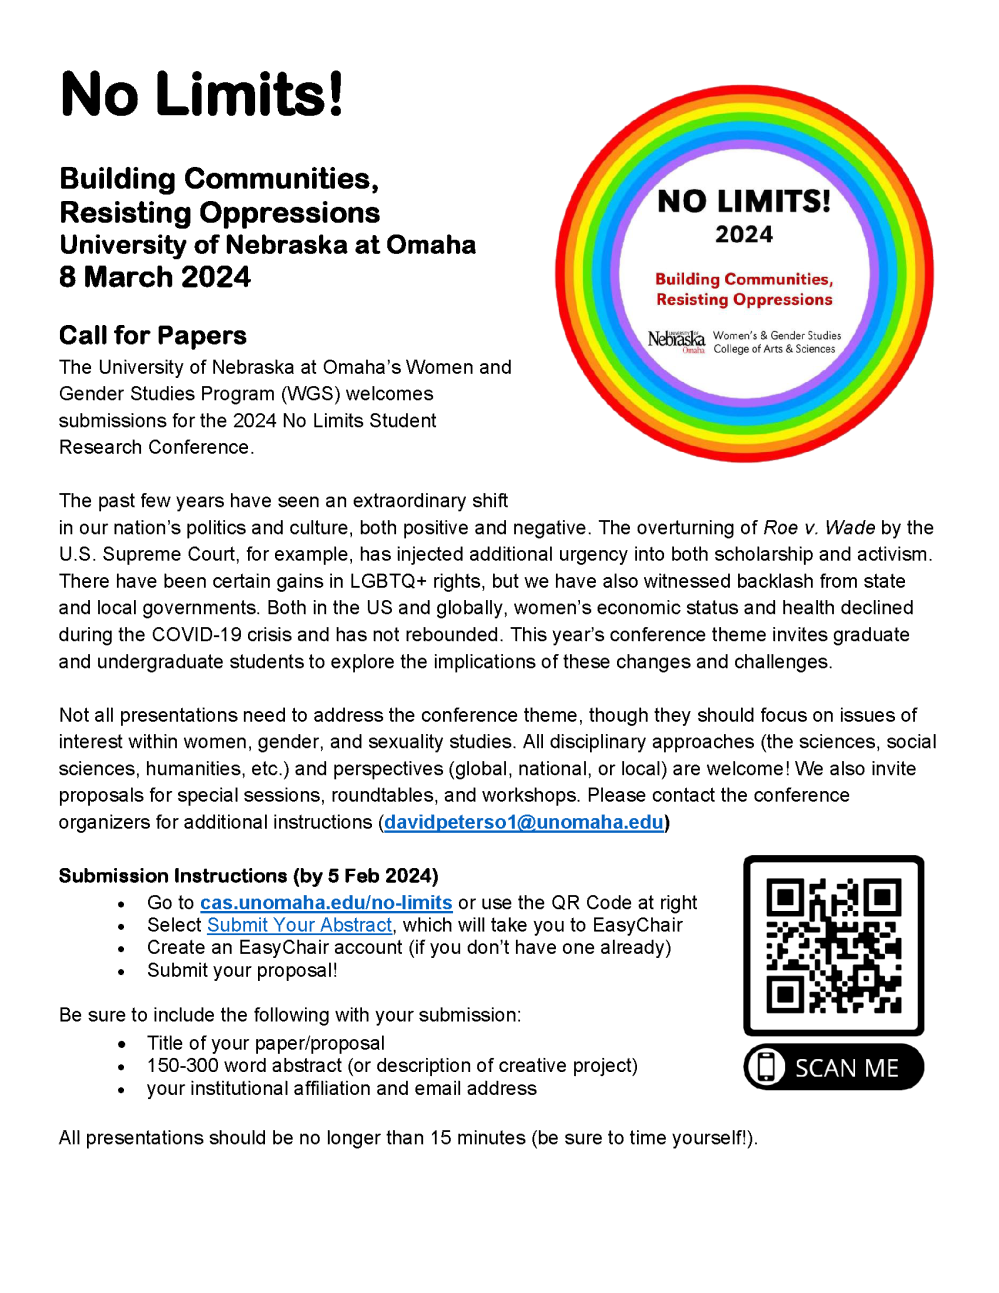 No Limits! Student Research & Creativity Conference - March 8, 2024